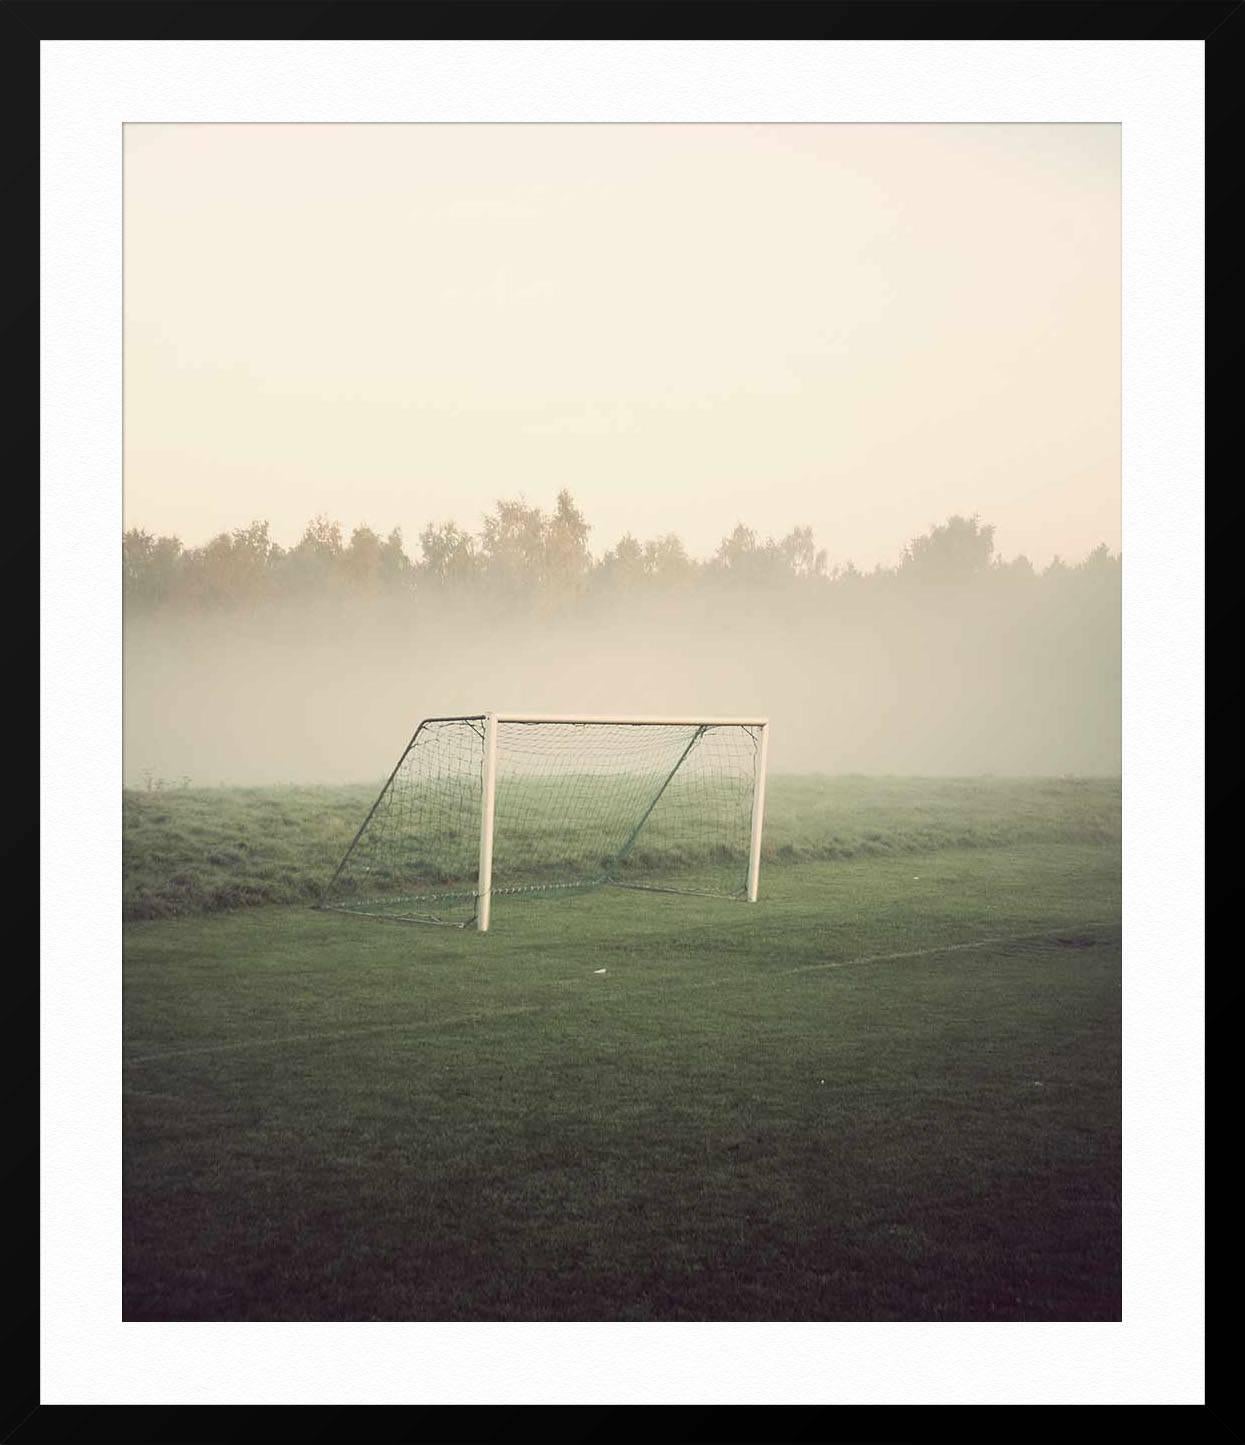 ABOUT THIS PIECE: Photographer Kim Høltermand took this photo in the early morning at a Danish Soccer Pitch. He is known for his moody, quiet photos that show public spaces before the crowds. They offer a sense of calm.

ABOUT THIS ARTIST: Kim